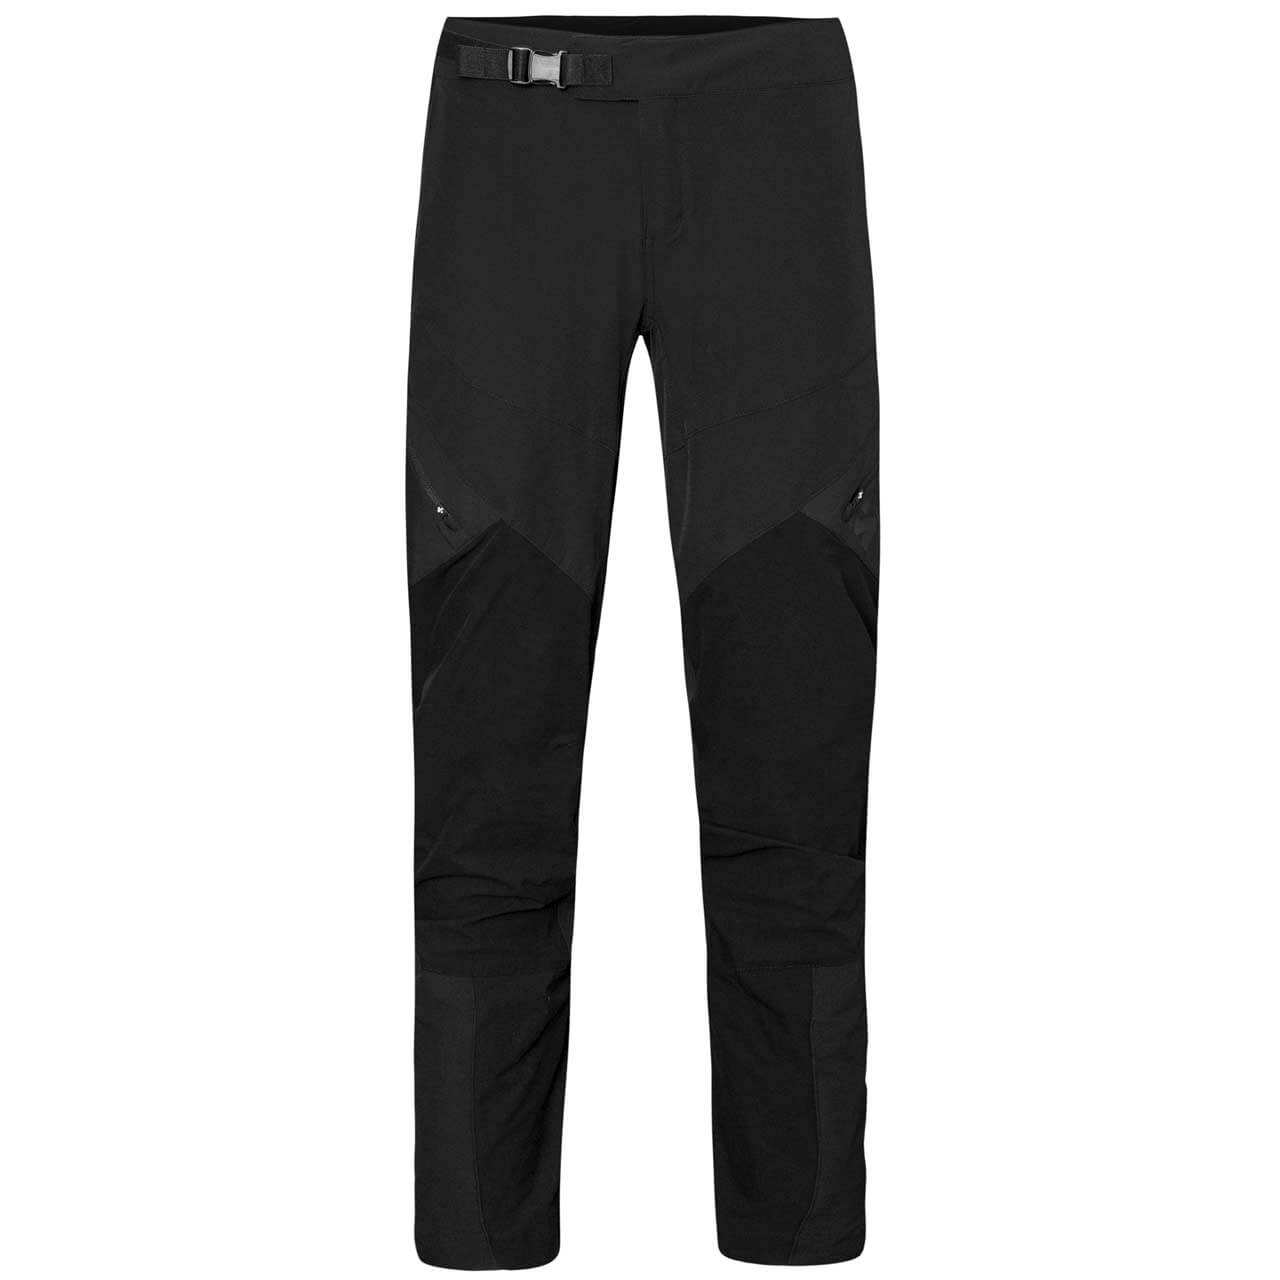 Sweet Protection Hunter Pants - Black, L von Sweet Protection}